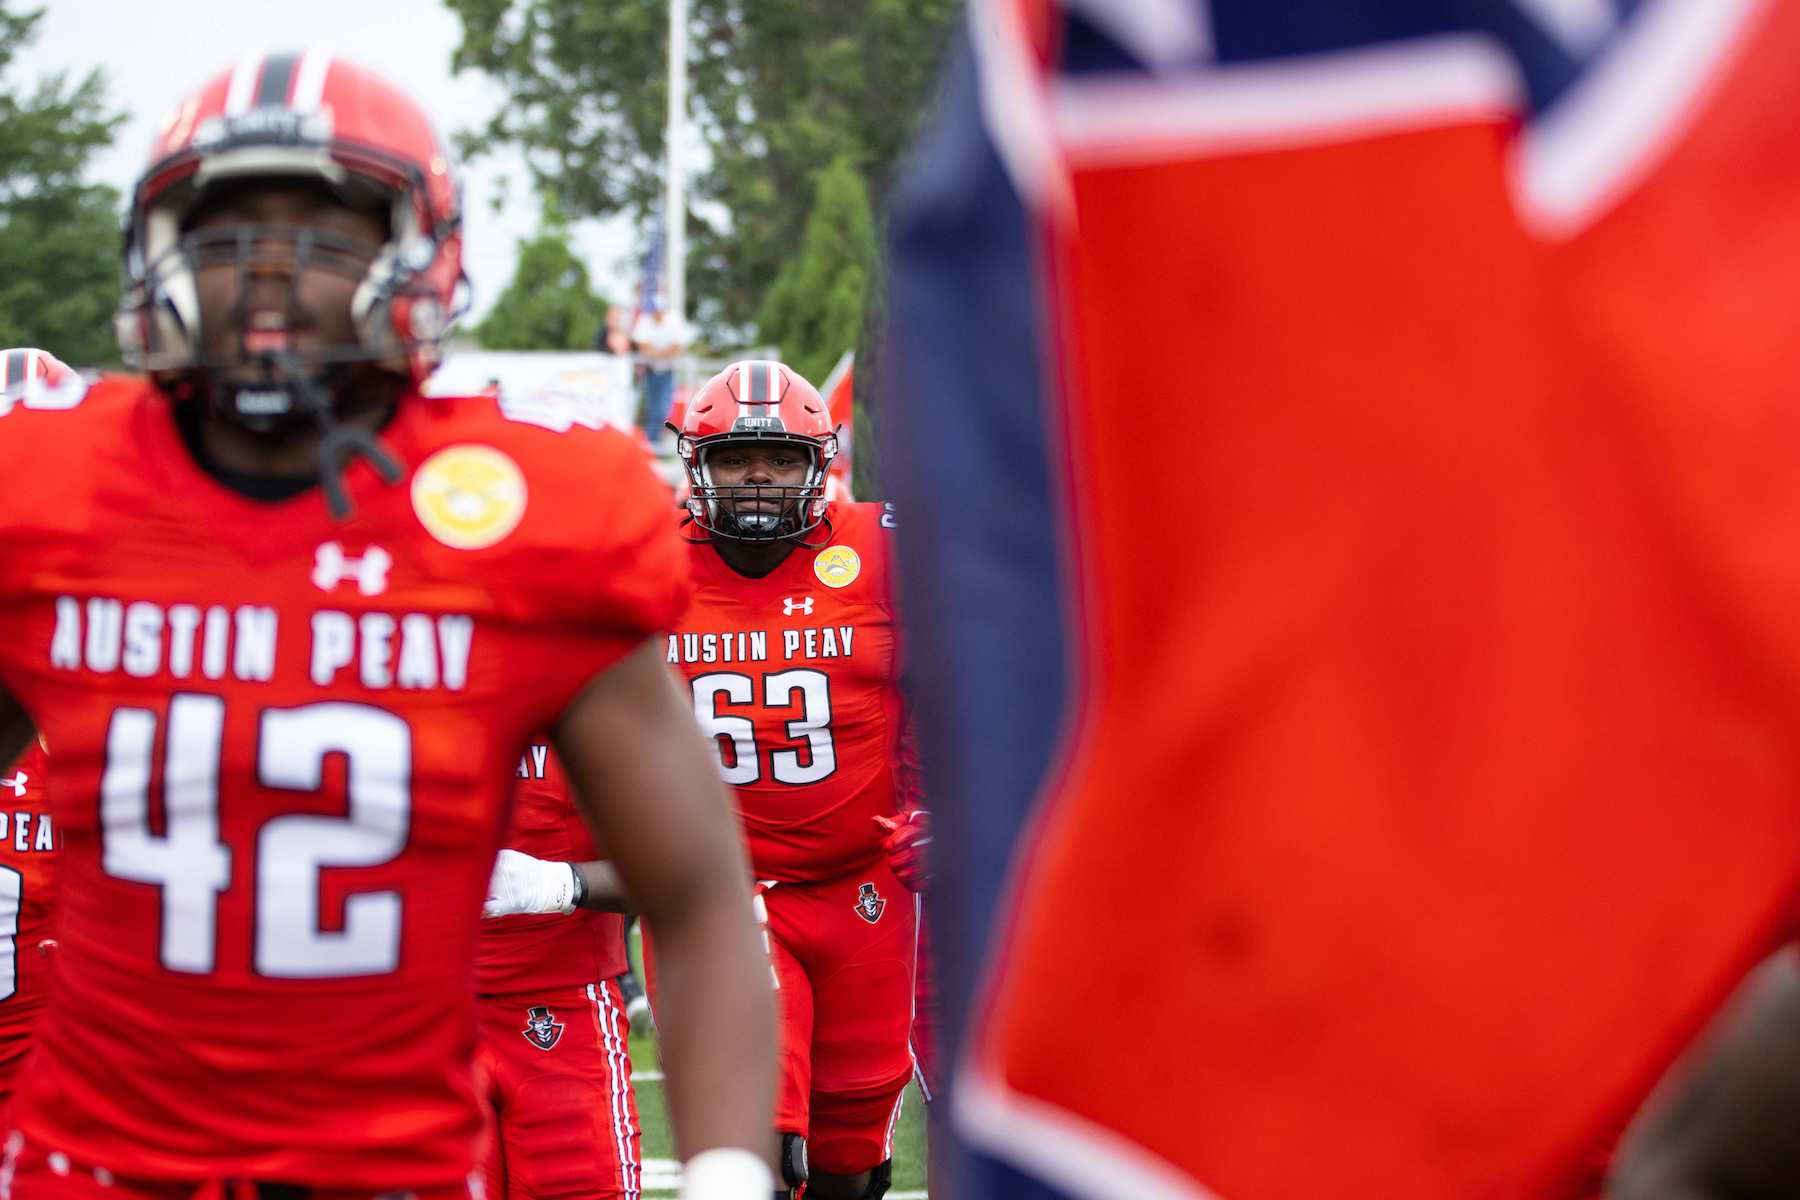 Offensive Lineman Donovan Haslam #63 runs out with the Govs football team, flanked by the Tennessee state flag on Saturday, Sept. 10. The team shut out Mississippi Valley State University 41-0.  Sean McCully University Photography and Videography Coordinator 